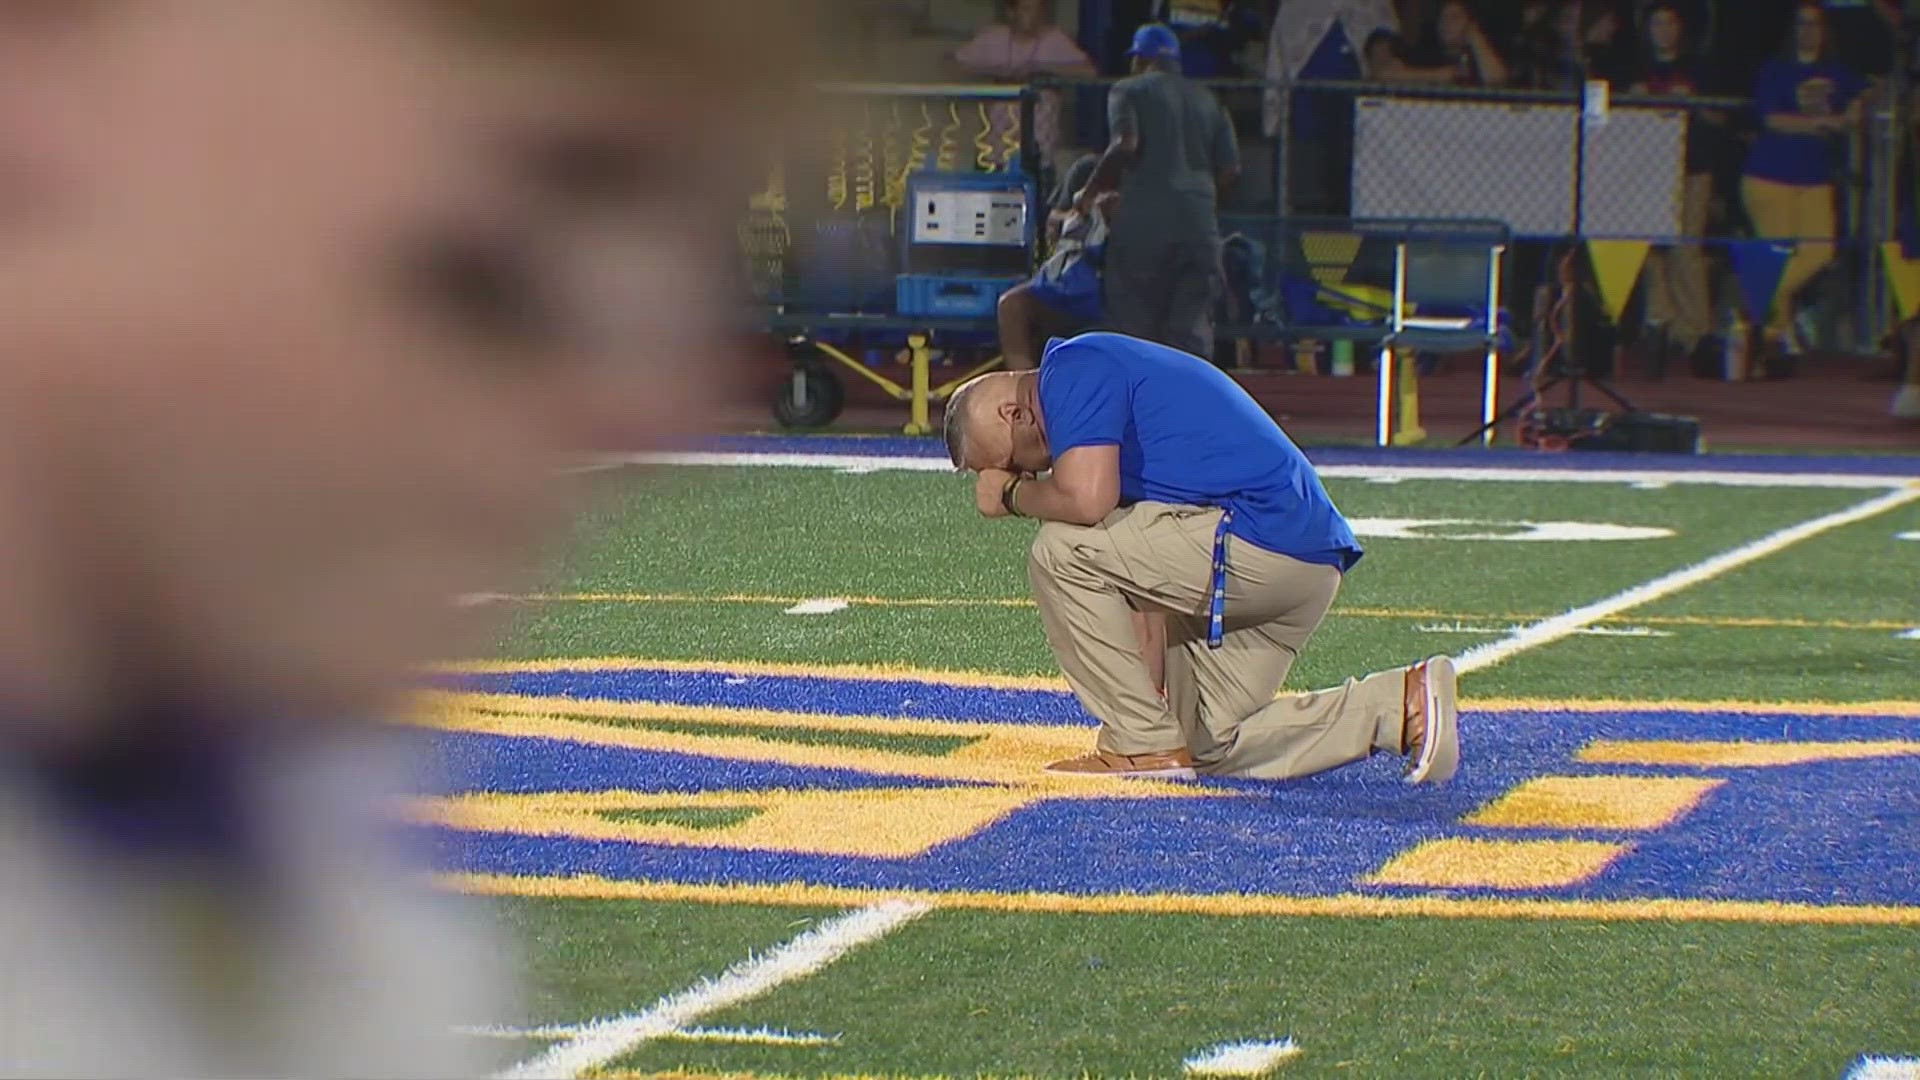 Joe Kennedy coached his first game since 2015, when he last pressed his knee to the turf at Bremerton High School's Memorial Stadium.